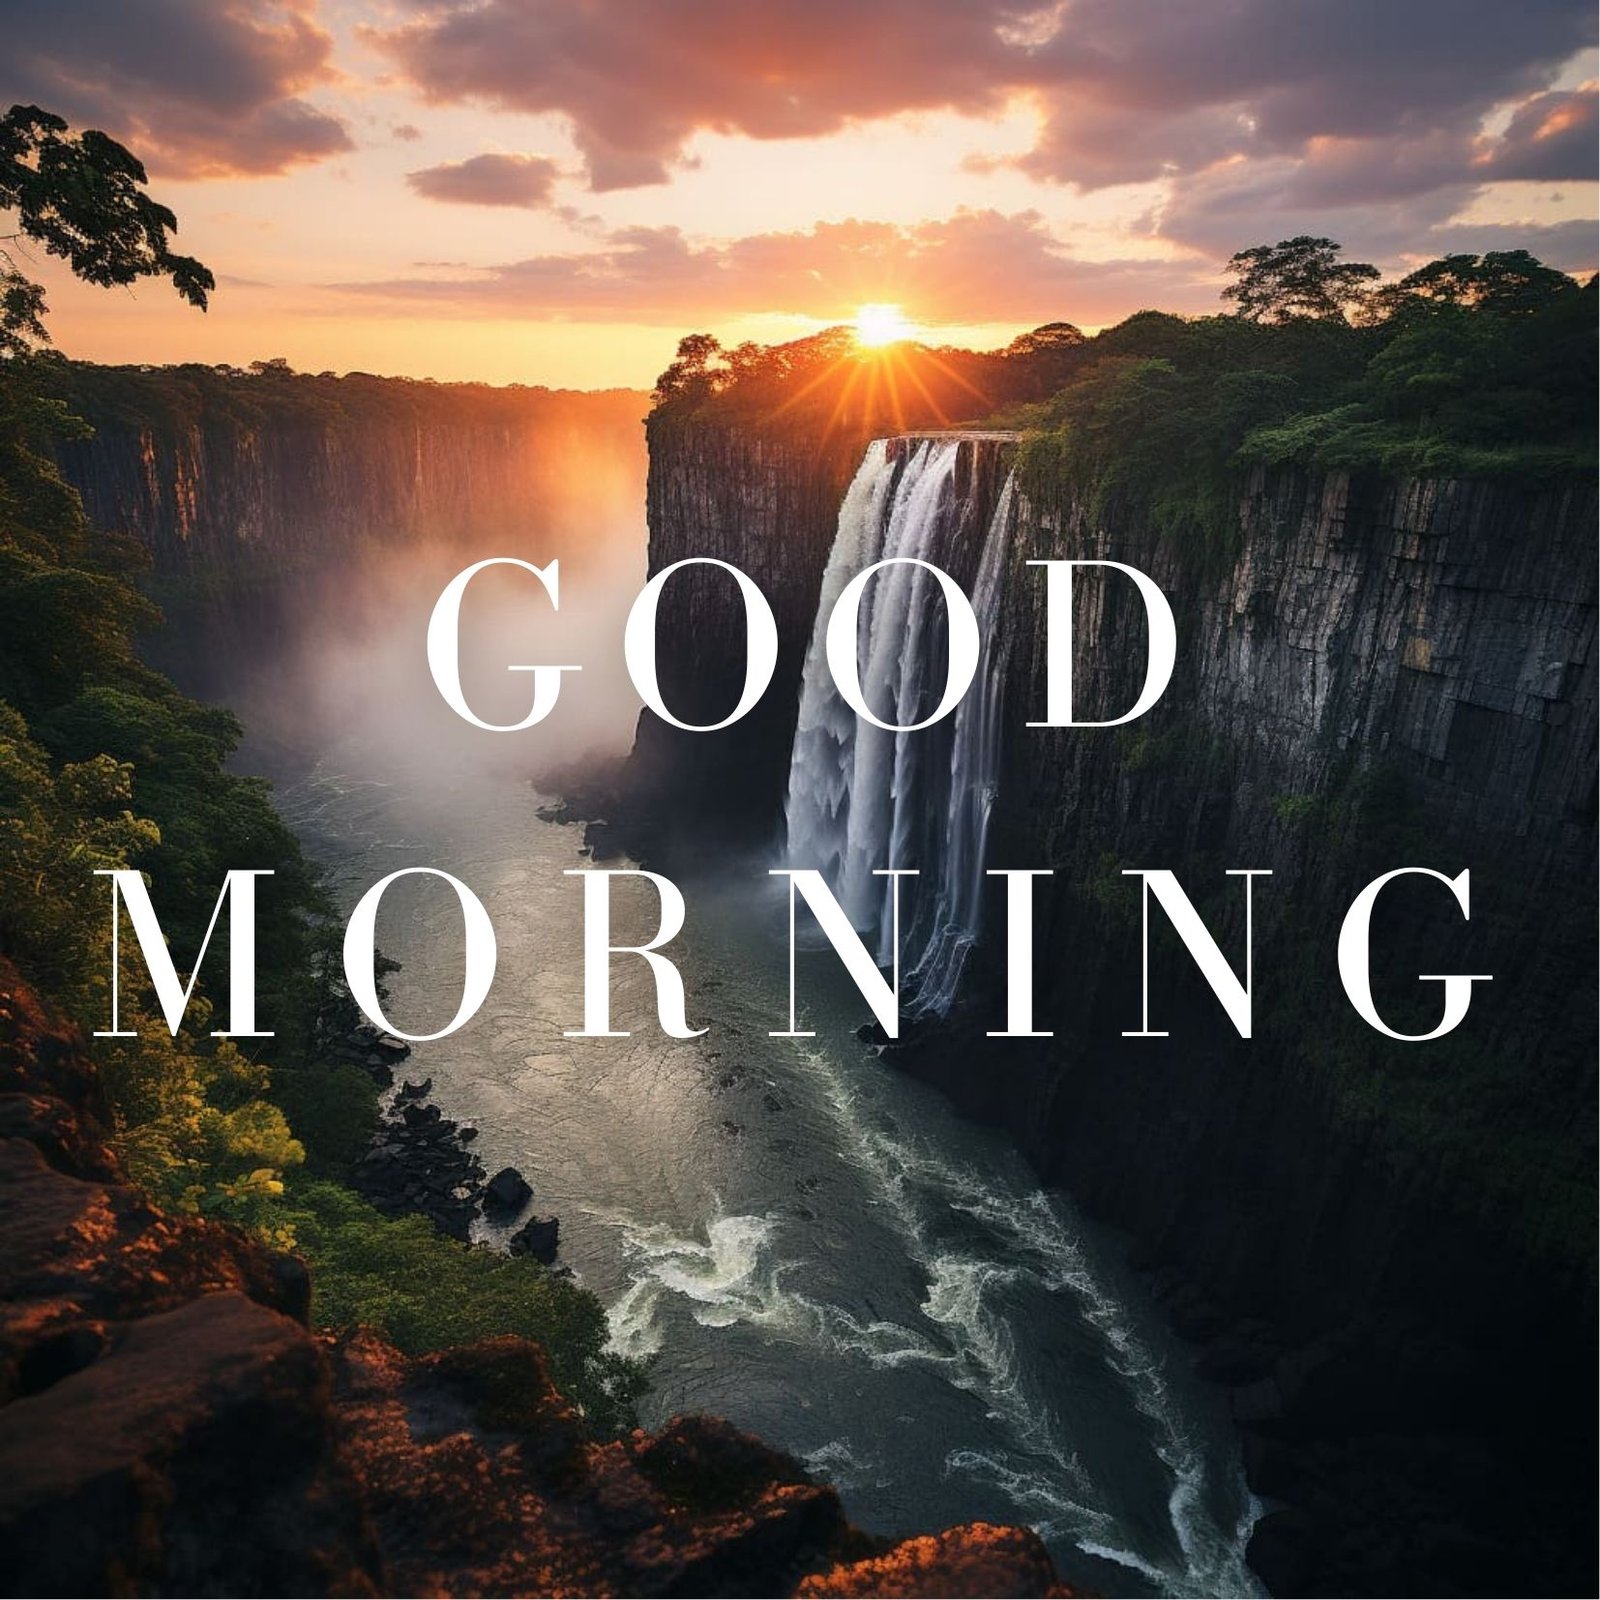 Awesome Good Morning Waterfall Photo